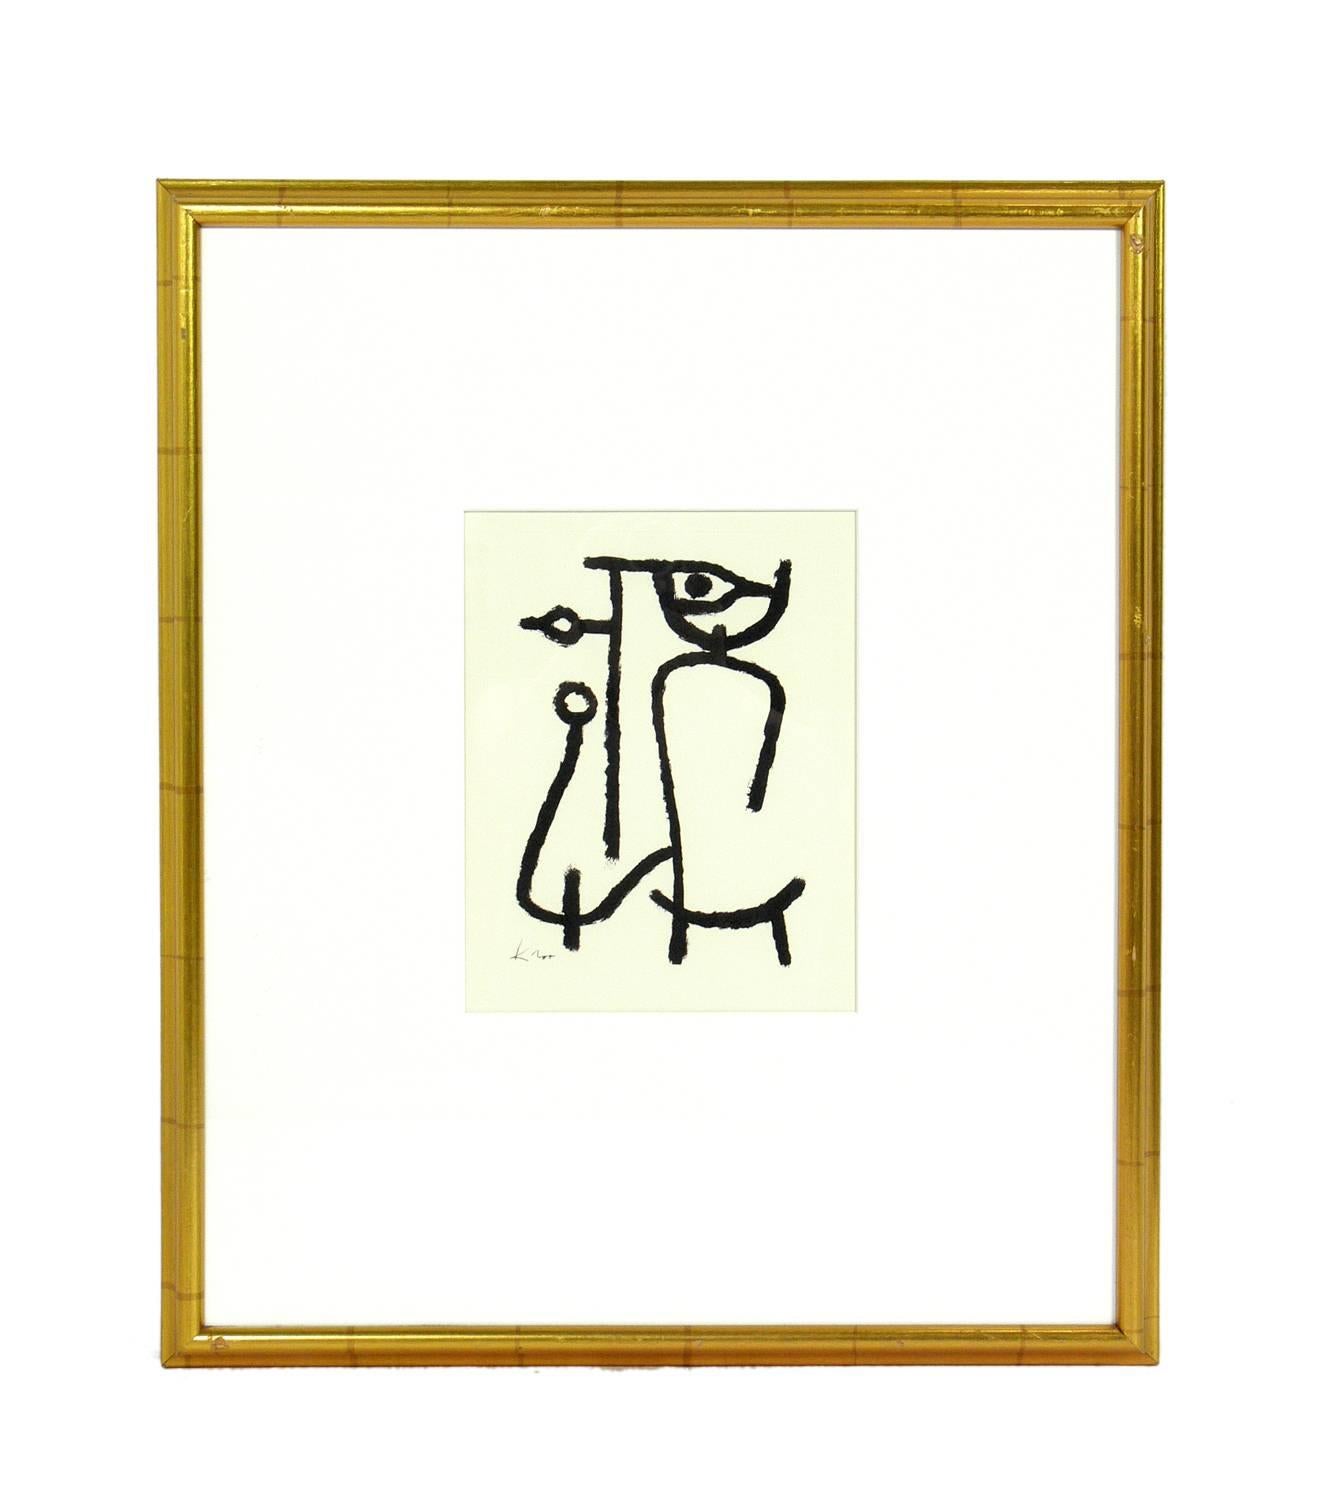 Selection of Modern Art, circa 1950s-1970s. From left to right, they are:

1) Figural female pen and ink drawing, American, circa 1950s, pictured on the far left measures 13